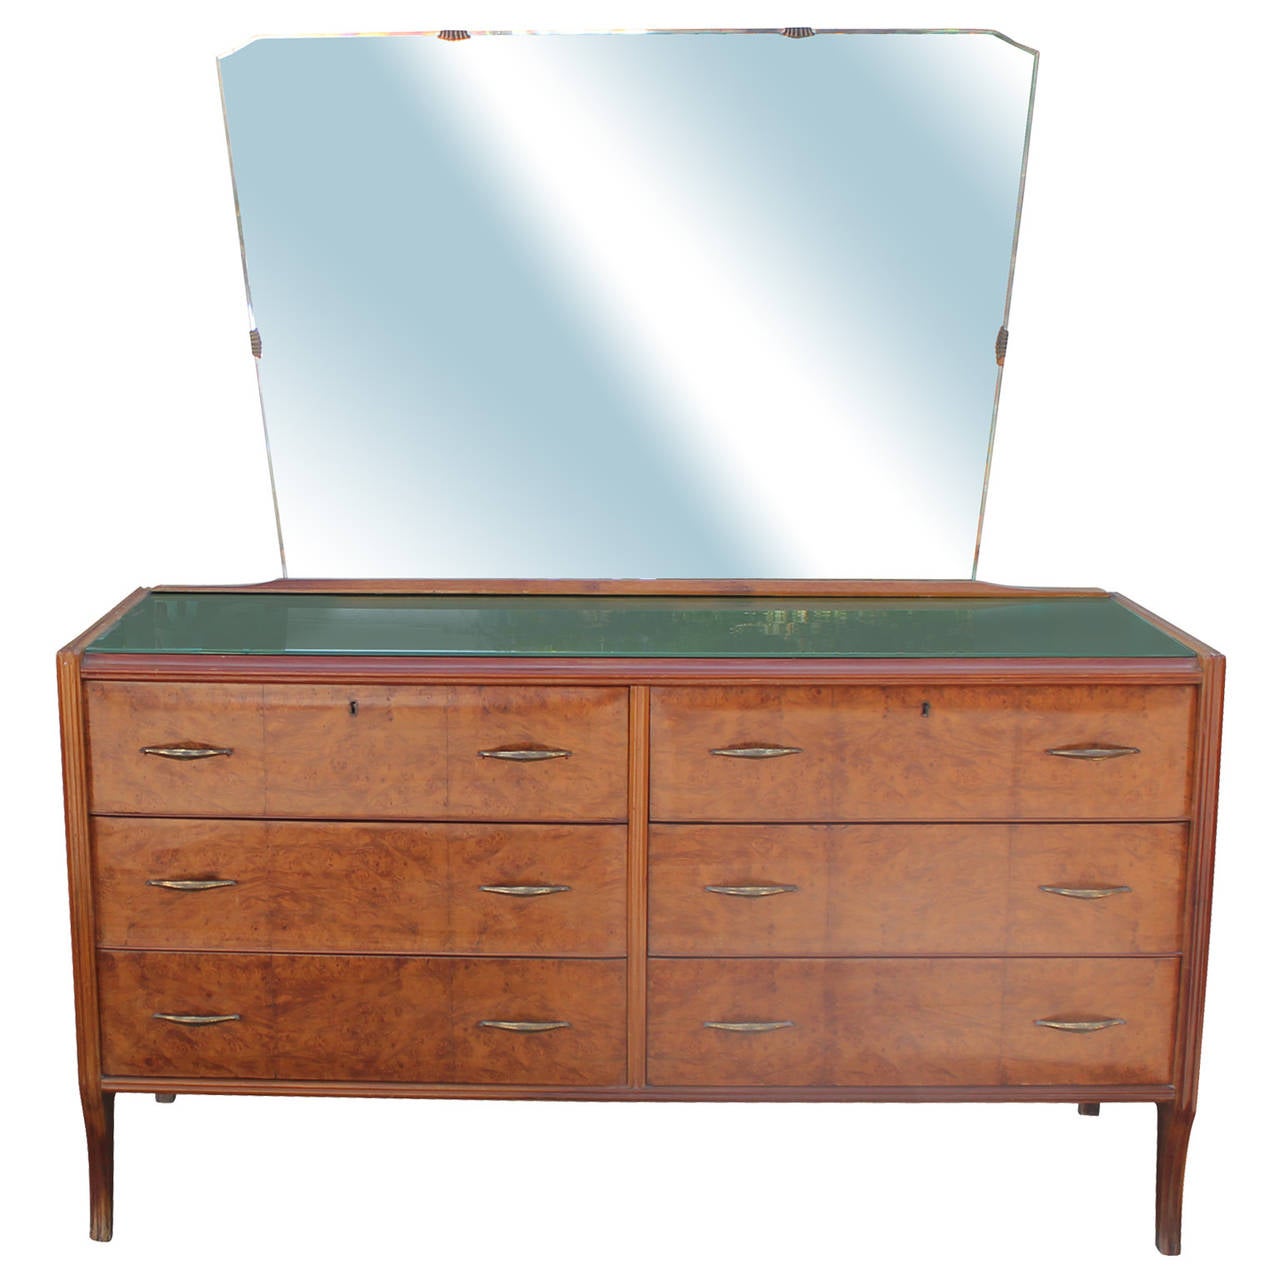 Fabulous Italian dresser or vanity finished in a gloss. Dresser has a stunning profile and brass hardware. Dresser is topped in green glass. Six drawers provide excellent storage. When the mirror is removed two holes are exposed in the top back-